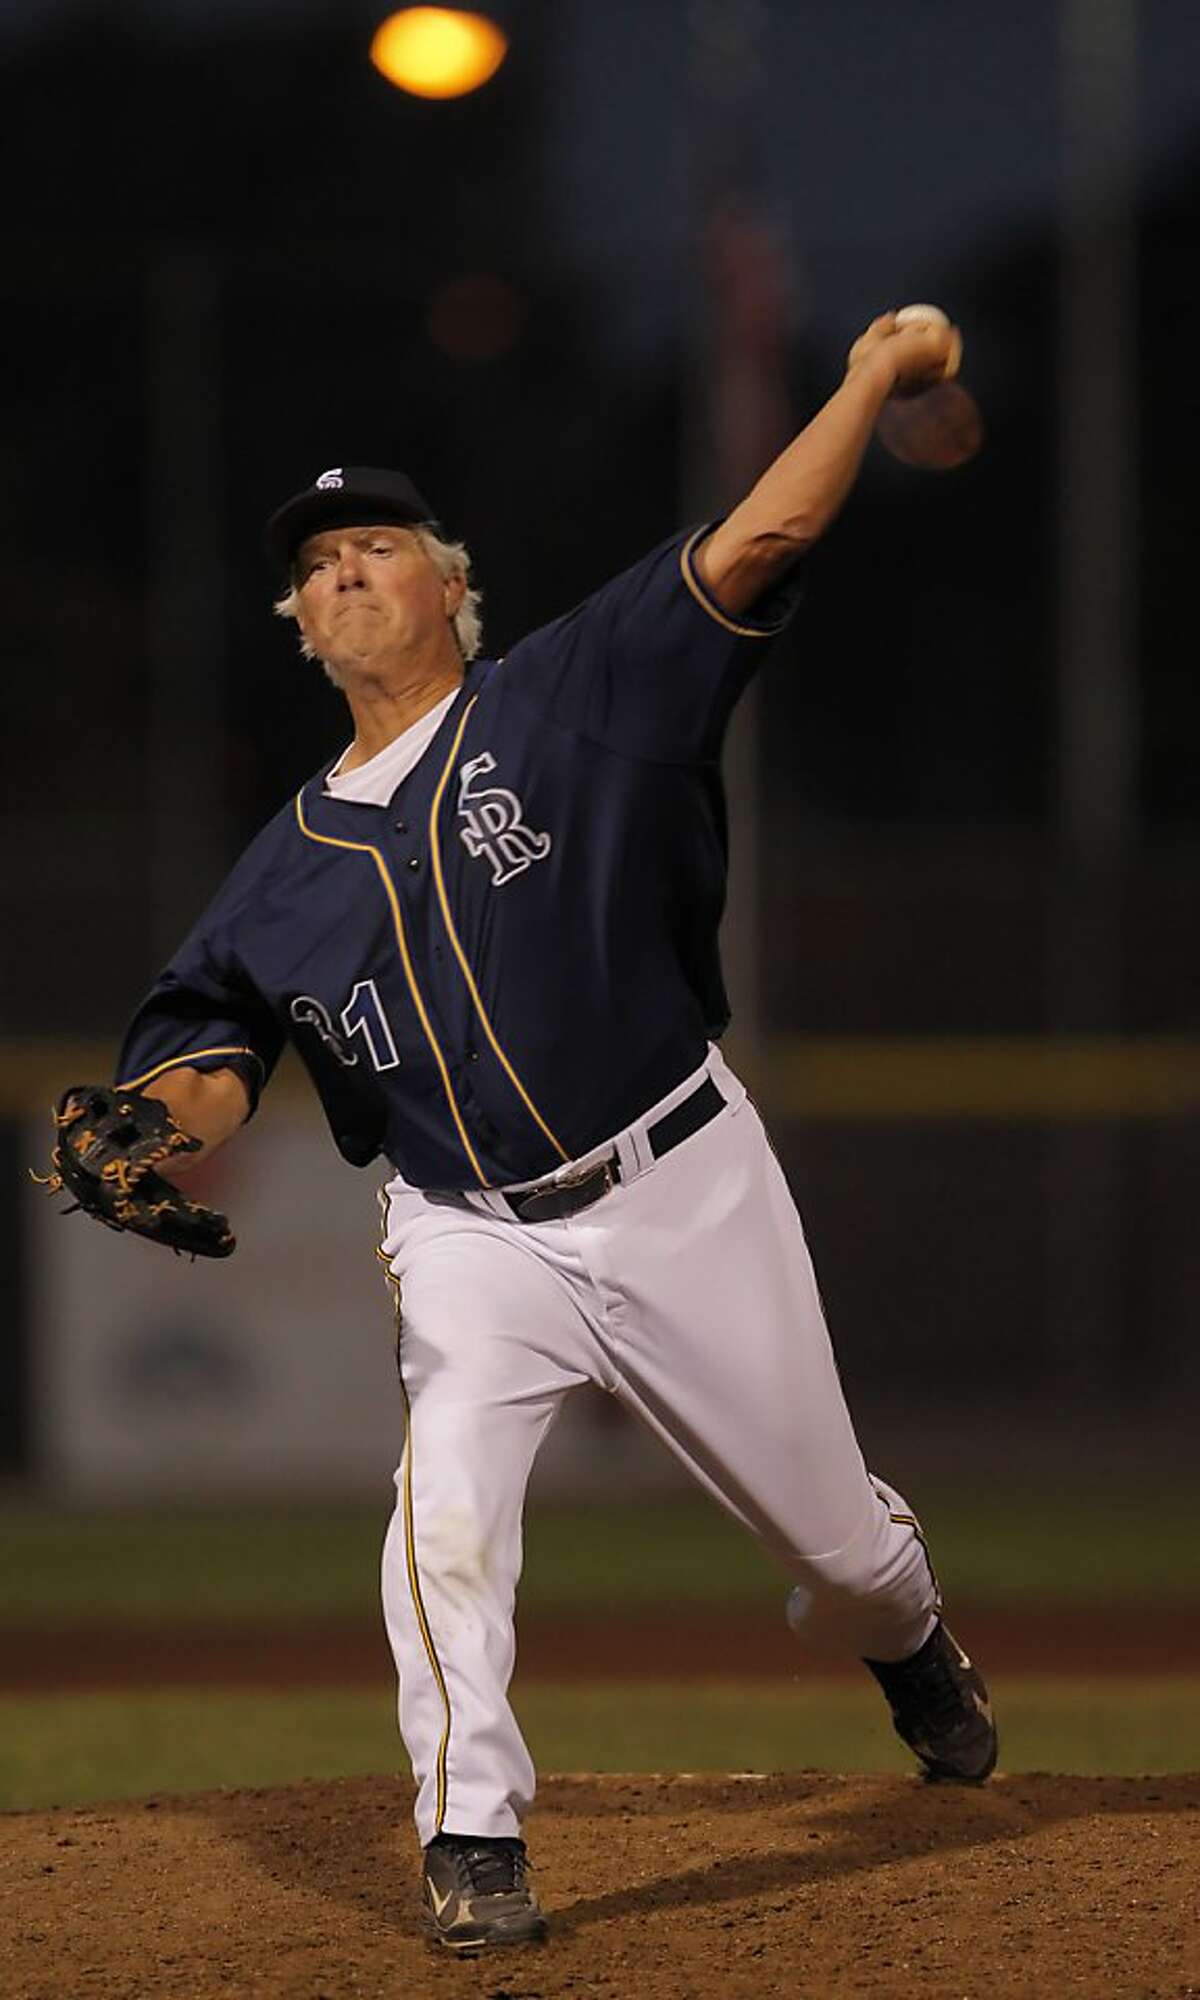 Bill "Spaceman" Lee pitches against Maui's Na Koa Ikaika at Albert Park in San Rafael, Calif., on Thursday, August 23, 2012. Bill "Spaceman" Lee played with the hopes to become the oldest man to win a professional baseball game when he takes the mound on Thursday for the San Rafael Pacifics.